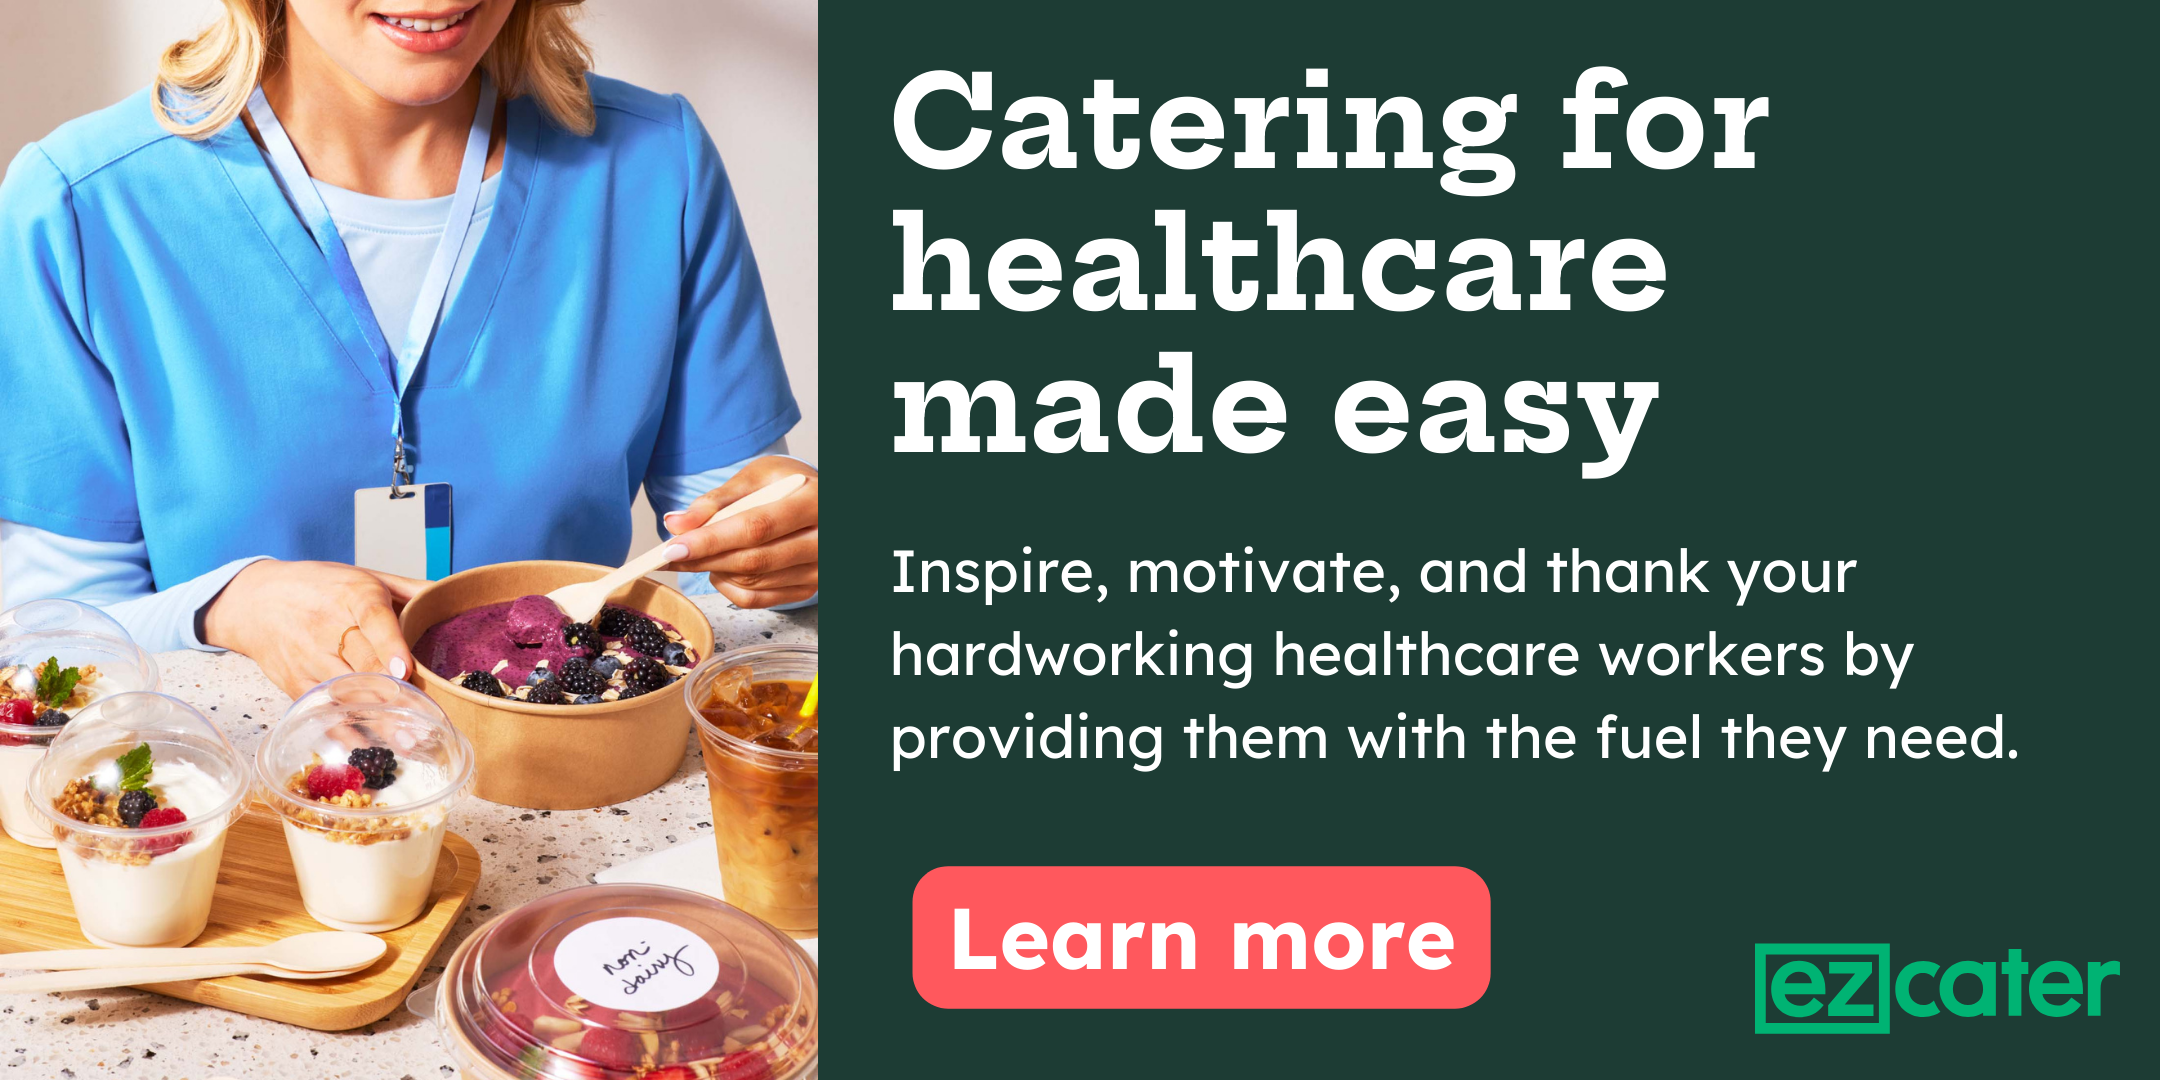 Catering for healthcare made easy. Inspire, motivate, and thank your hardworking healthcare workers by providing them with the fuel they need. Learn more.